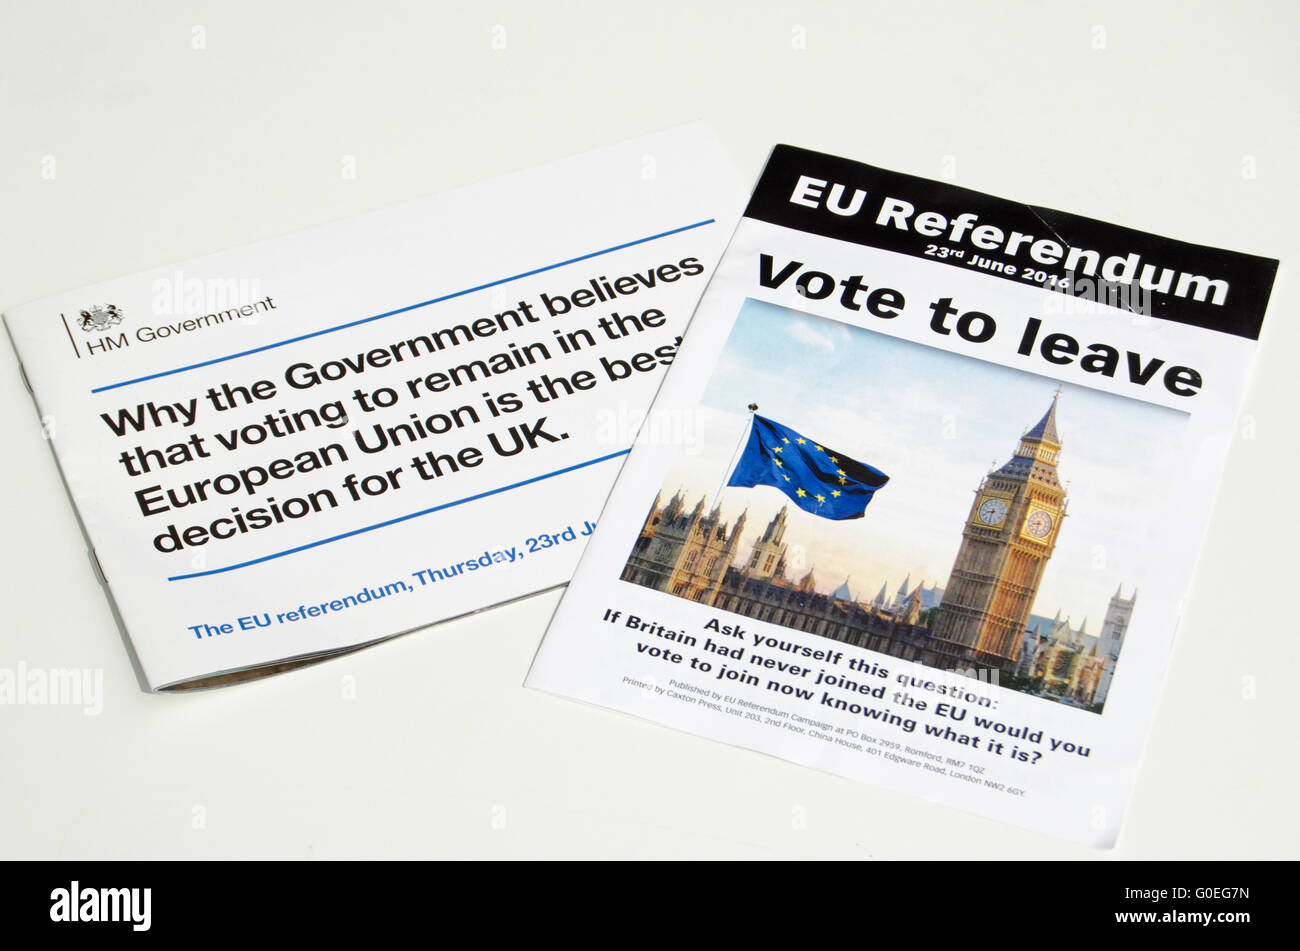 LONDON, UK - May 1, 2016:  Leaflets promoting the leave and remain sides of the EU Referendum campaign.  The vote is due to take place on June 23rd 2016. Stock Photo